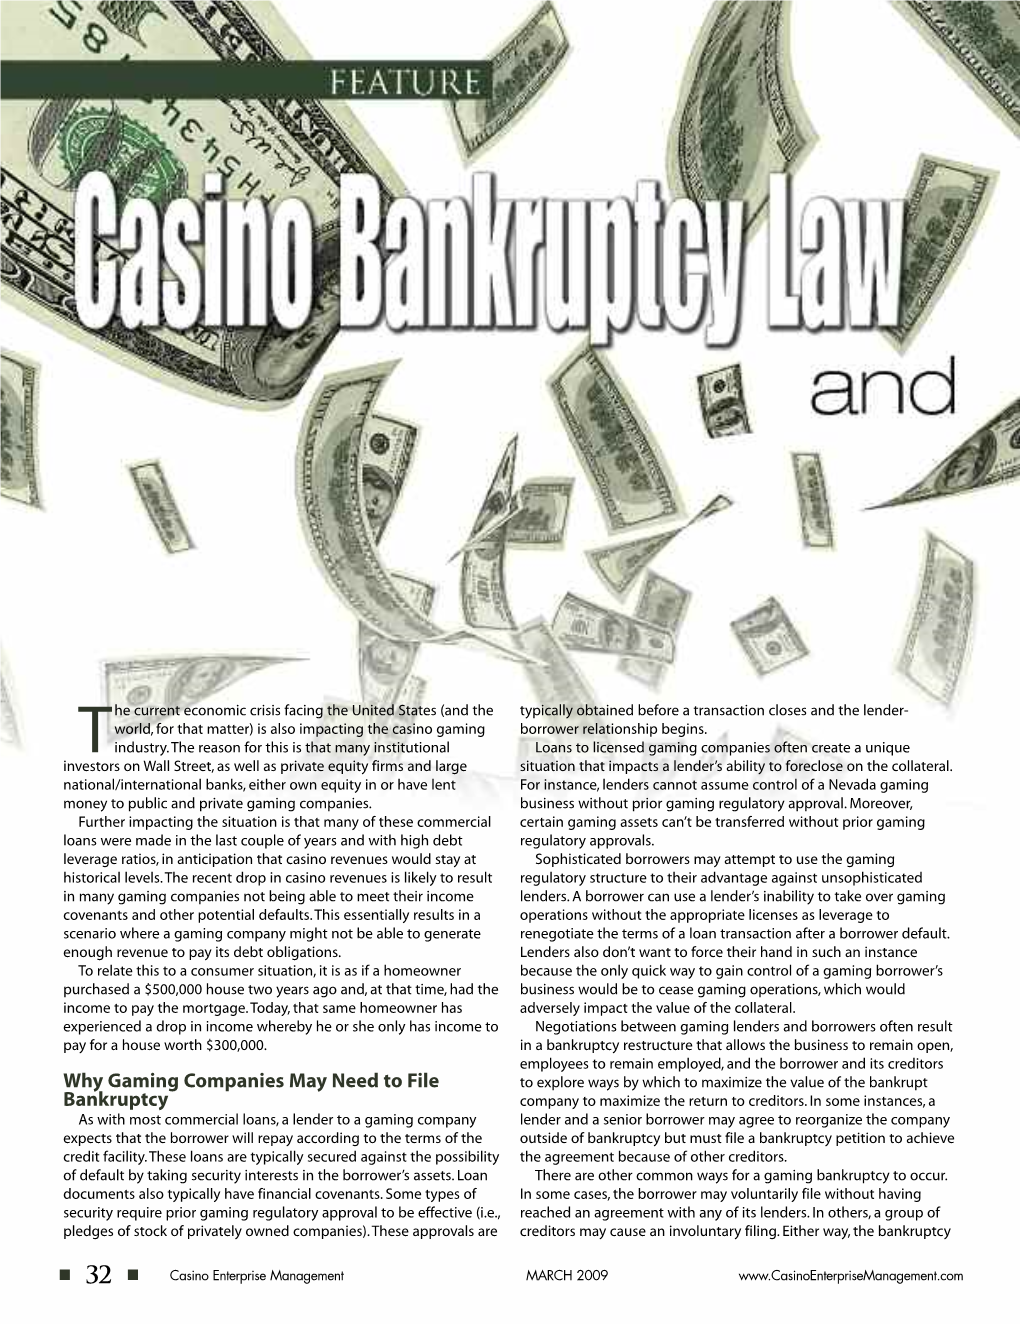 Casino Enterprise Management MARCH 2009 by Bruce Beesley, Sean Mcguinness and Tricia Darby